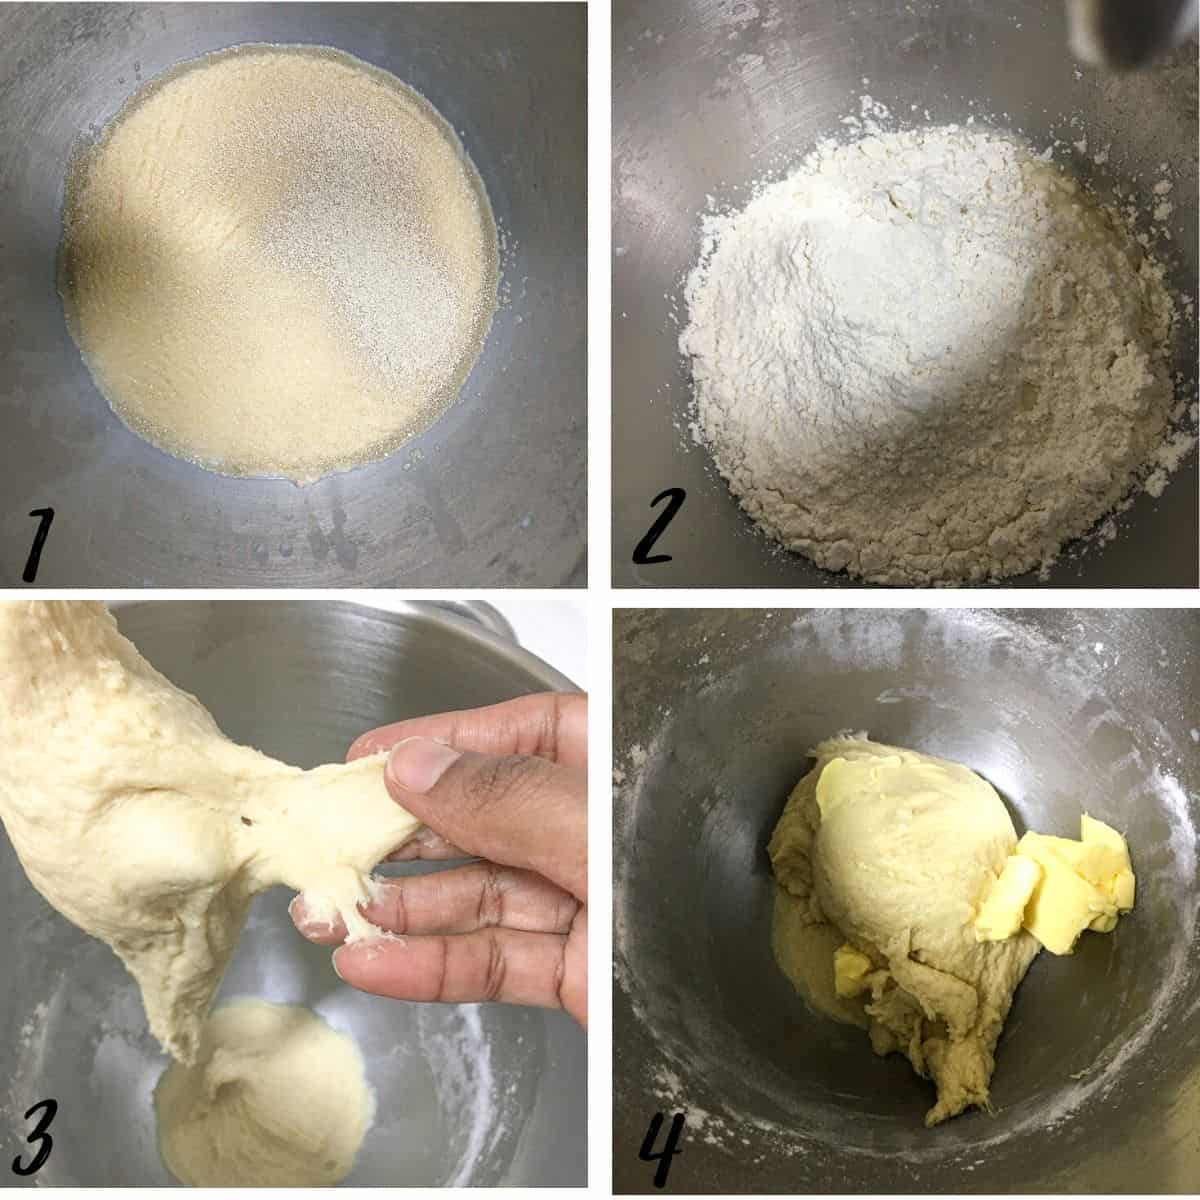 A poster of 4 images showing how to mix dough for coconut rolls